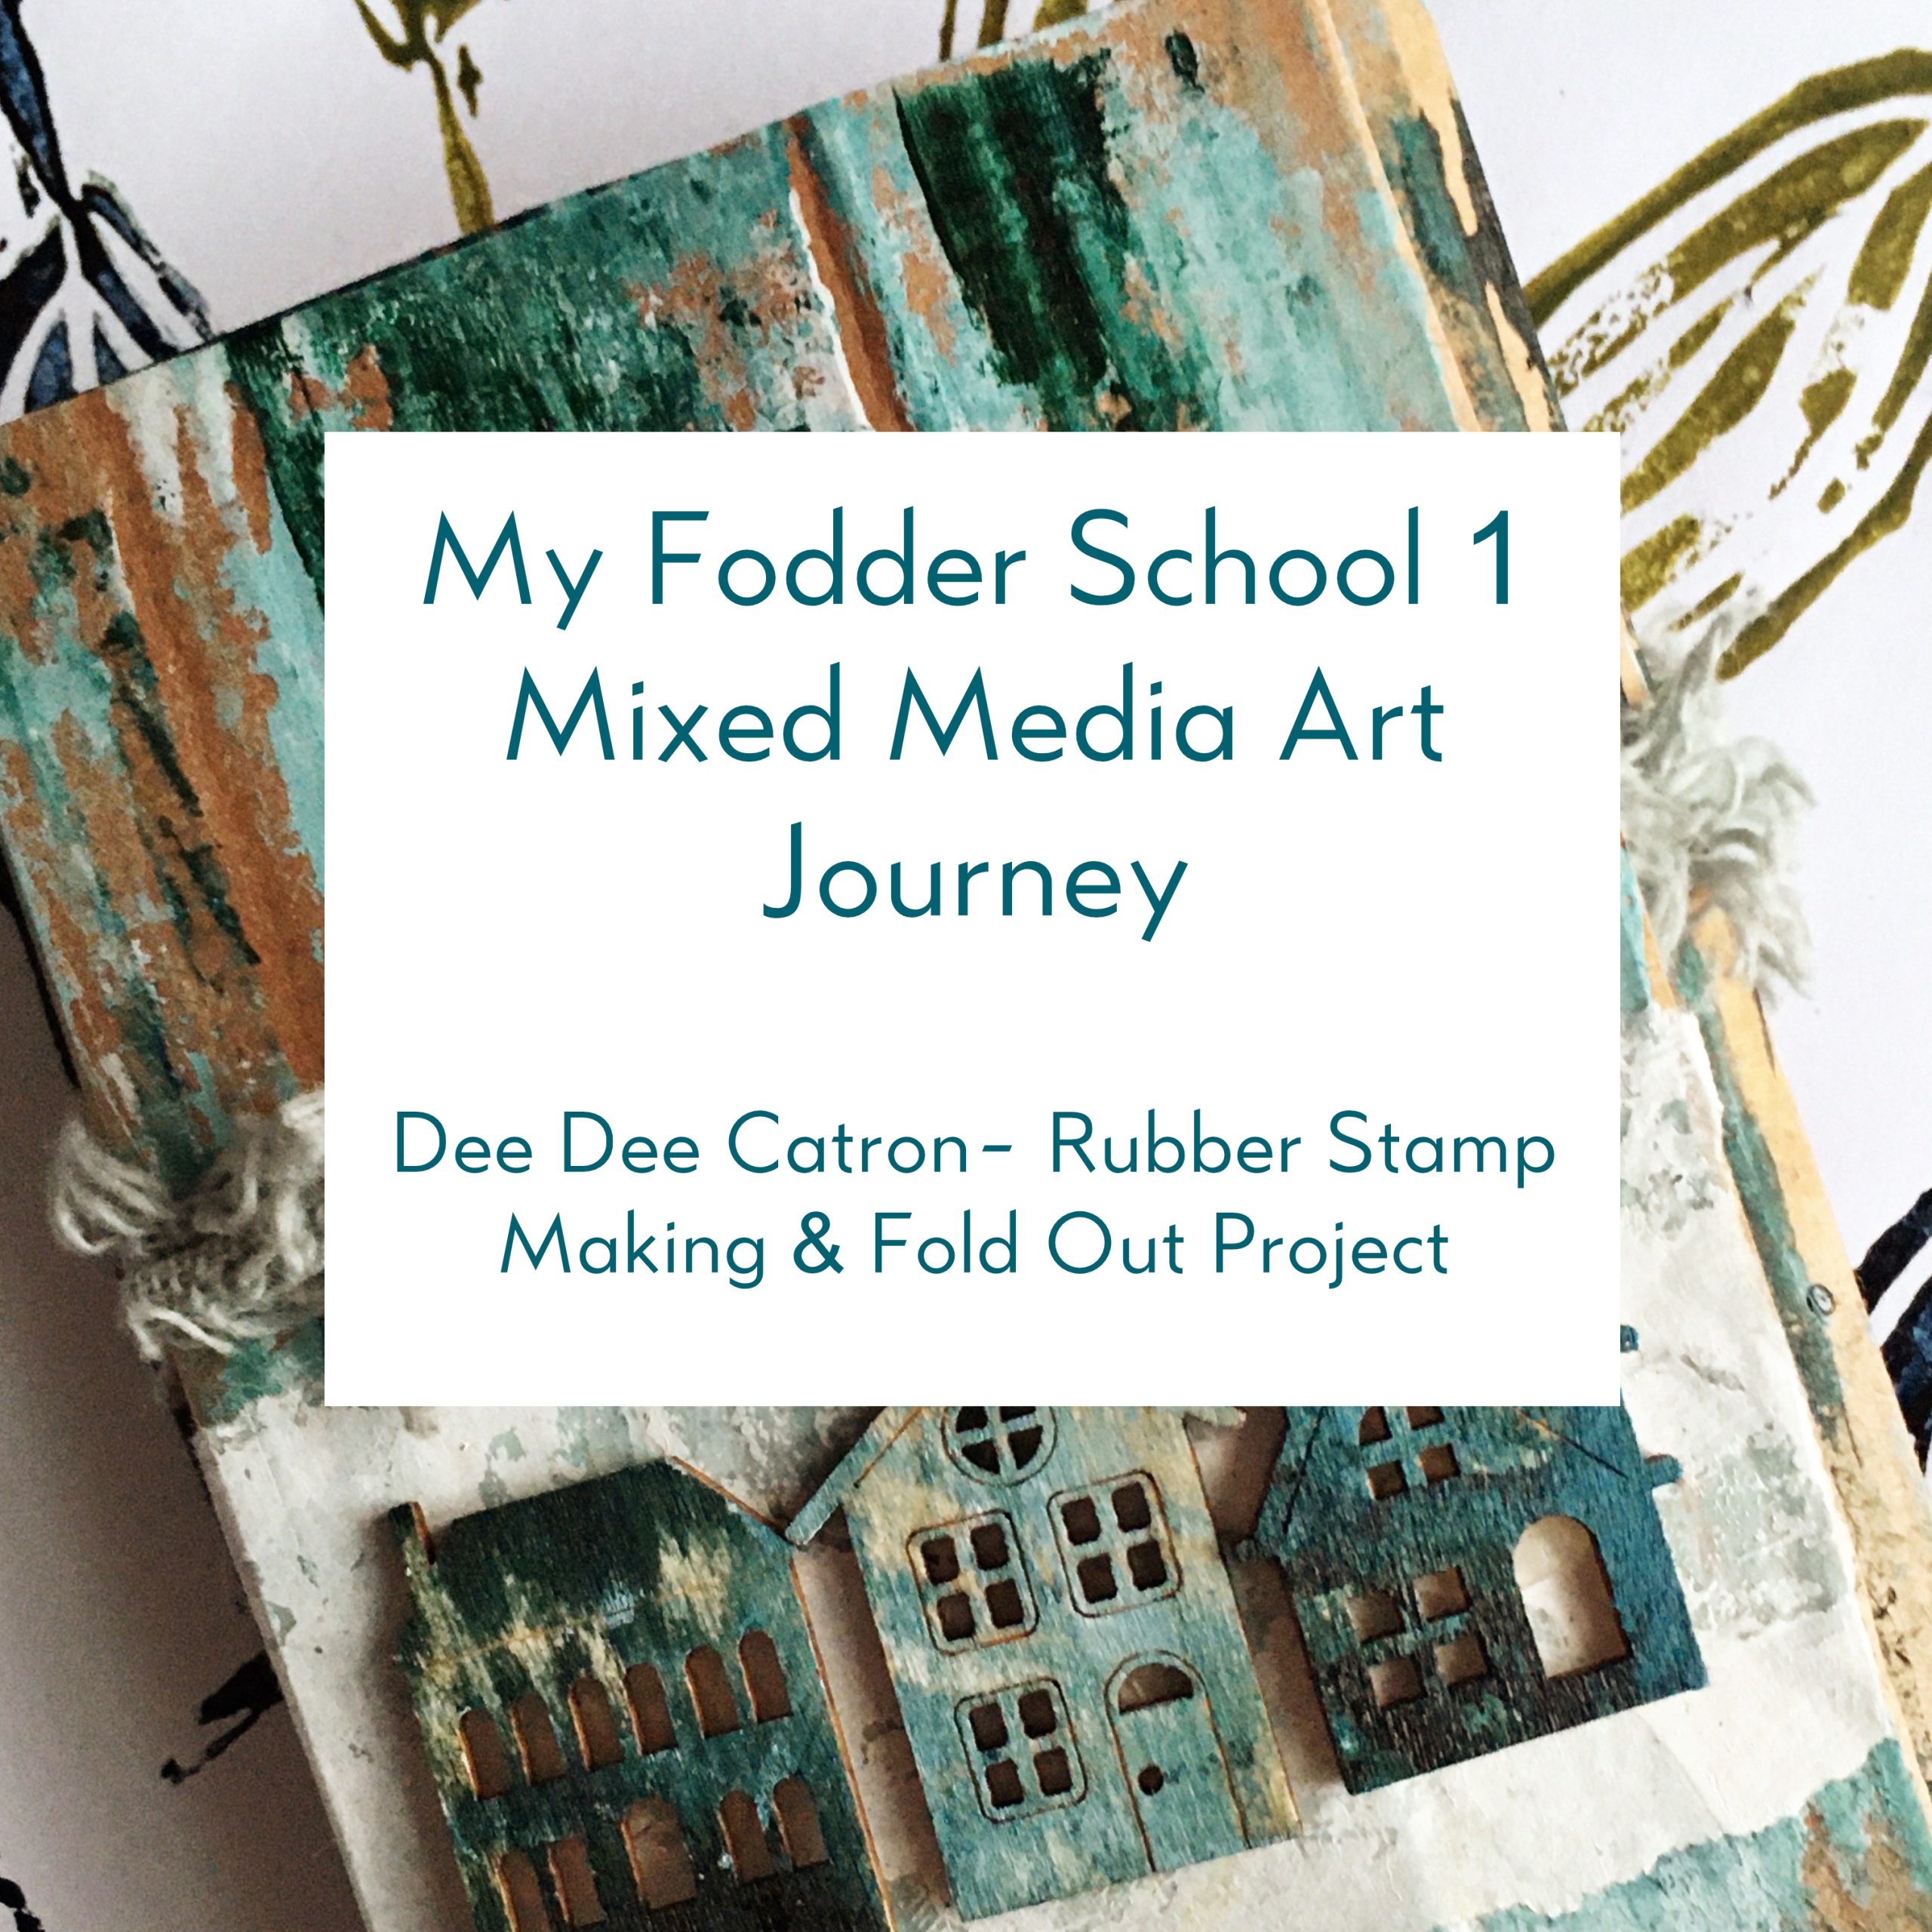 Fodder School 1 mixed media art online course altering embellishments, making rubber stamps and a special project